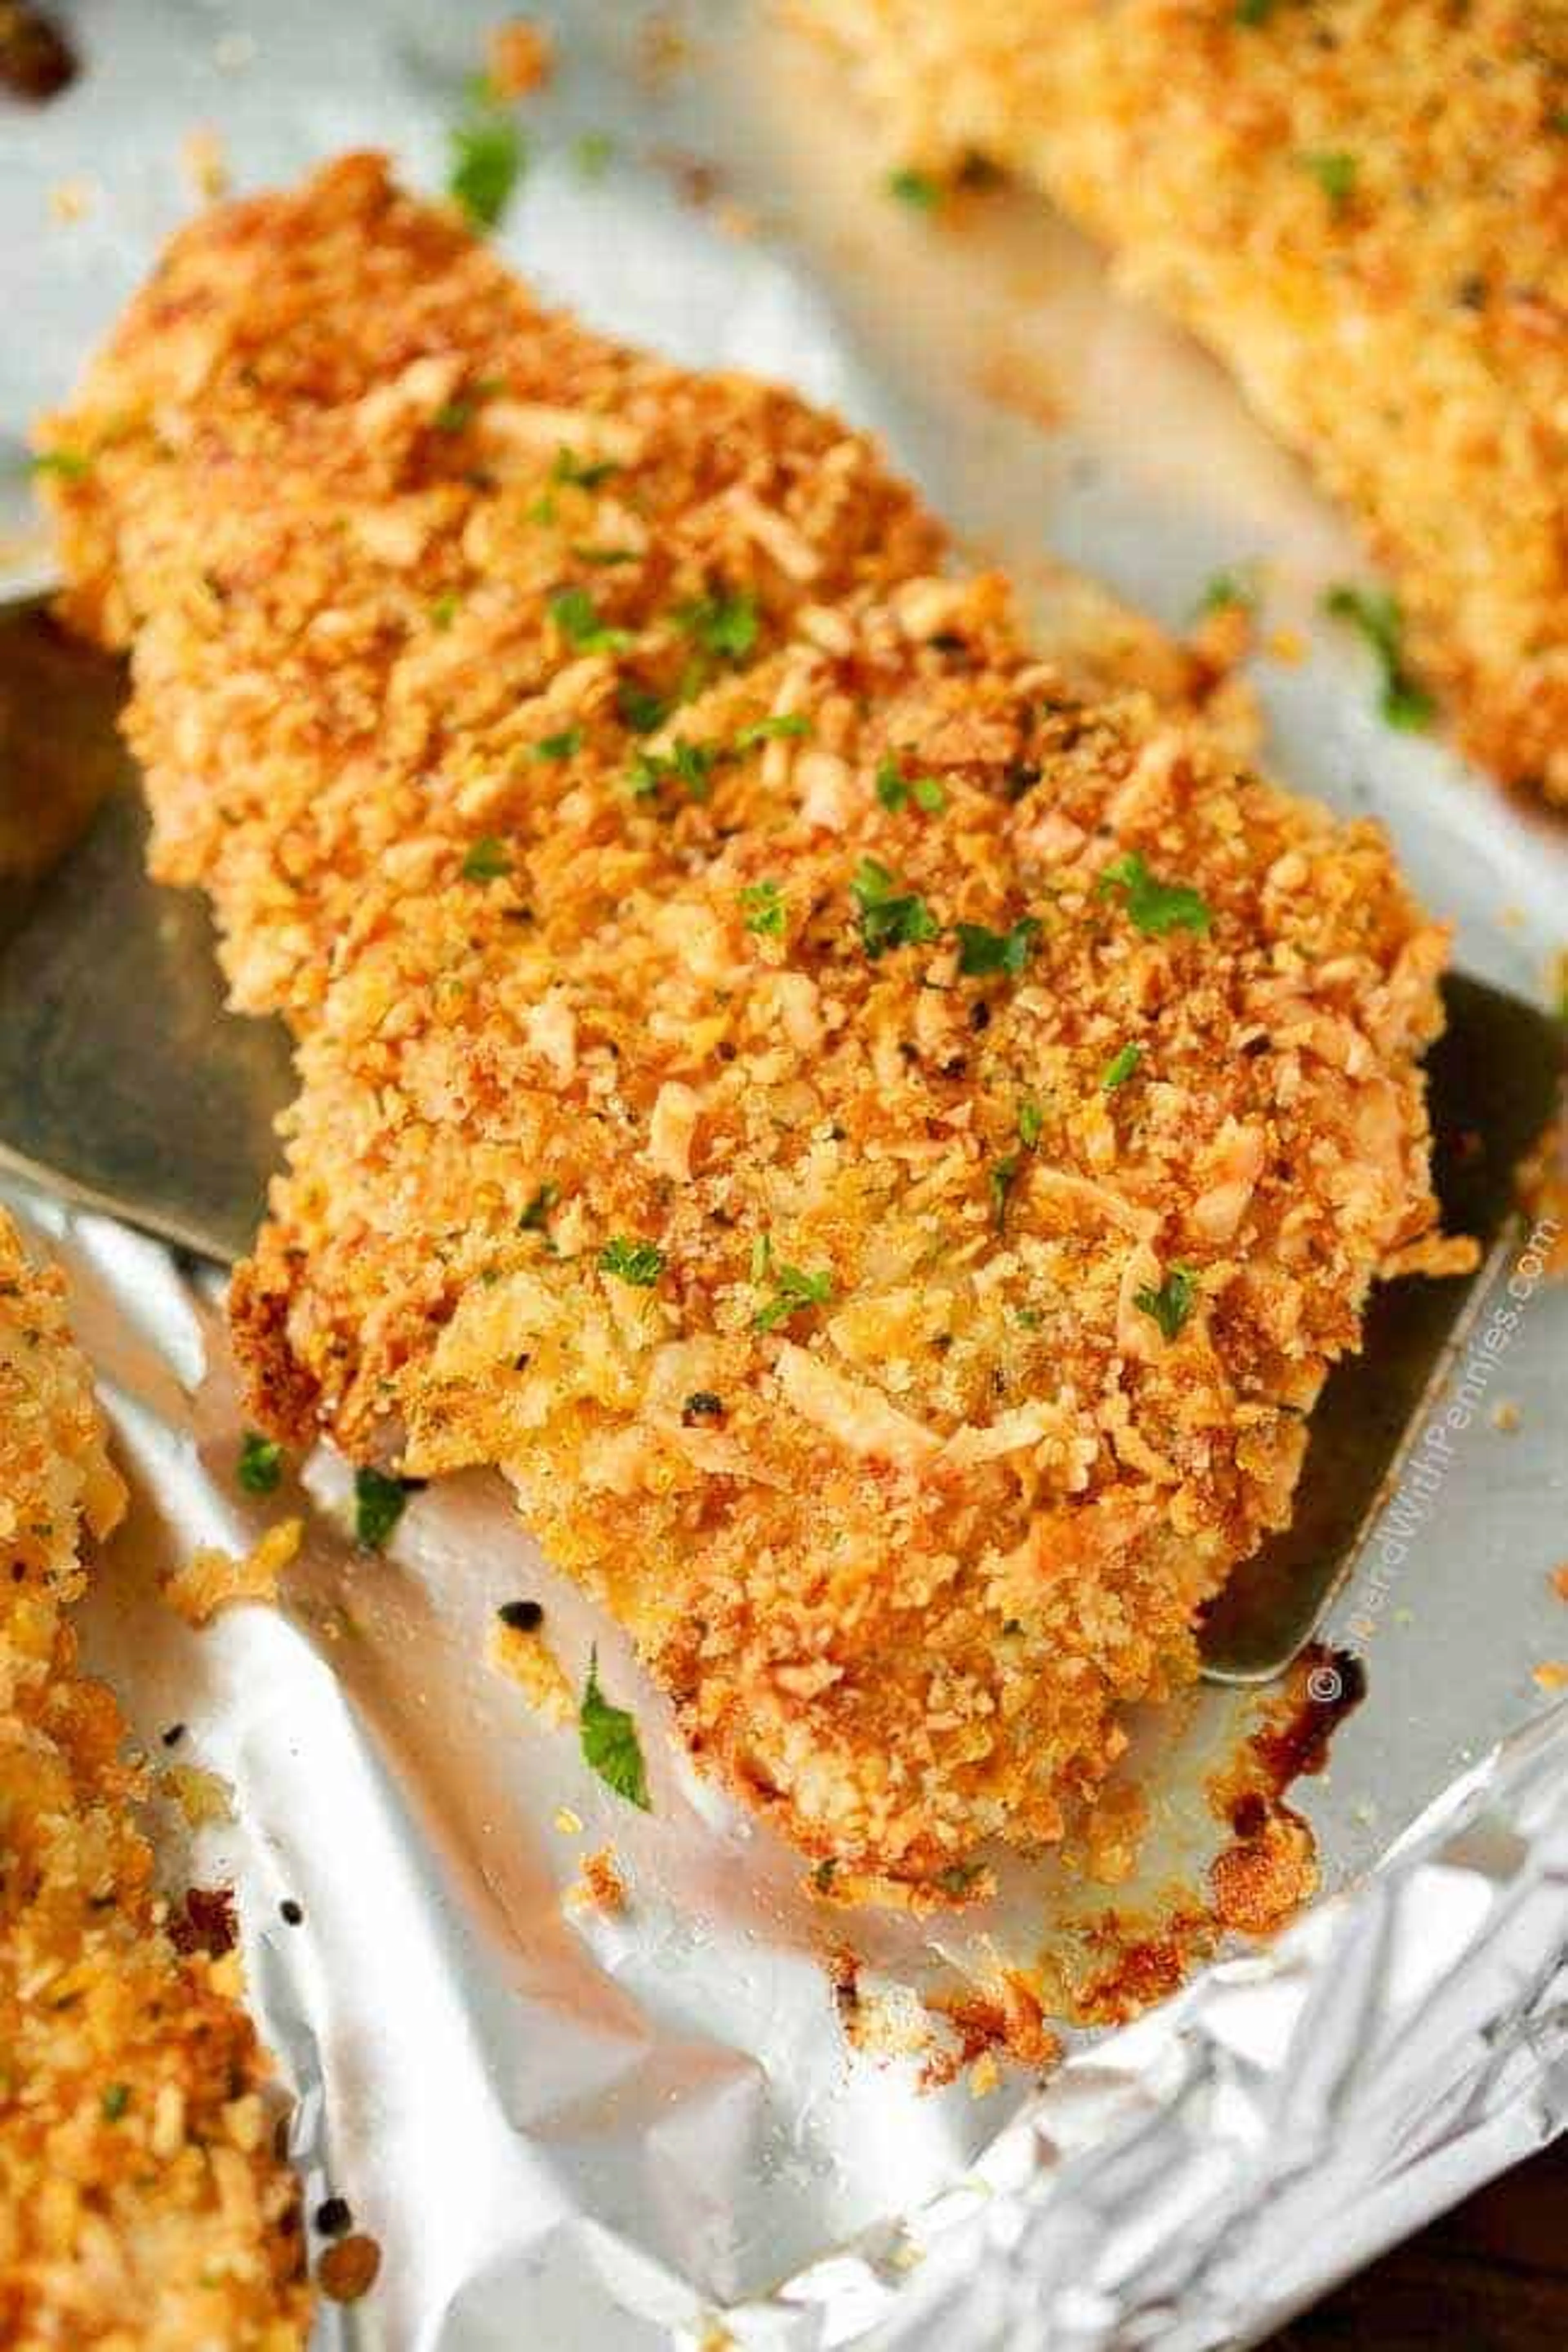 Crispy Parmesan Crusted Chicken (Baked)